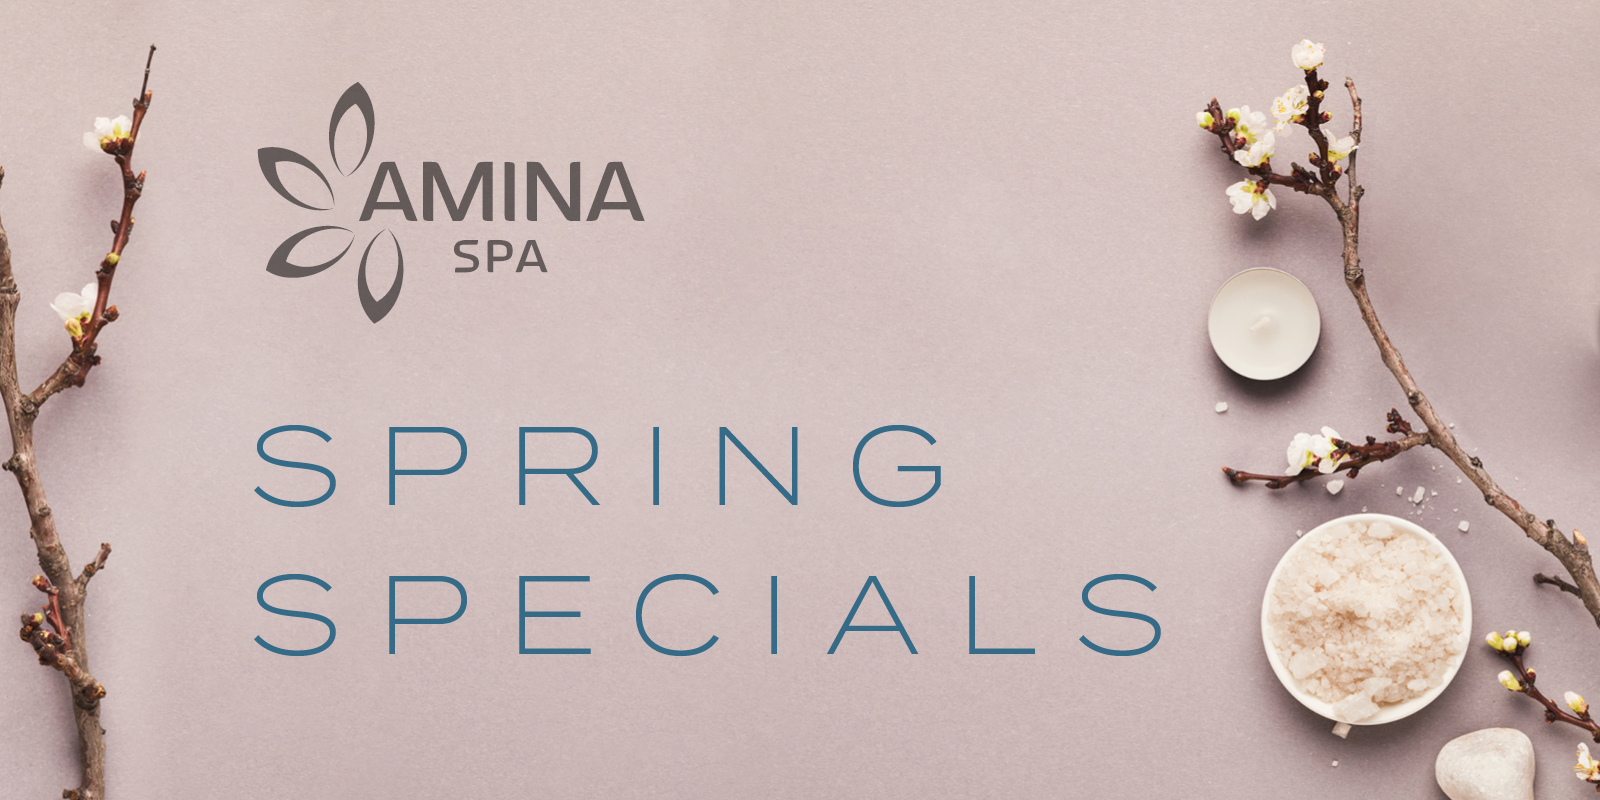 Amina Spa - Spring Specials Visual - custom graphic promoting spring specials. Pink-ish in color, white cherry blossom branches, bath salts, candles, sea shell